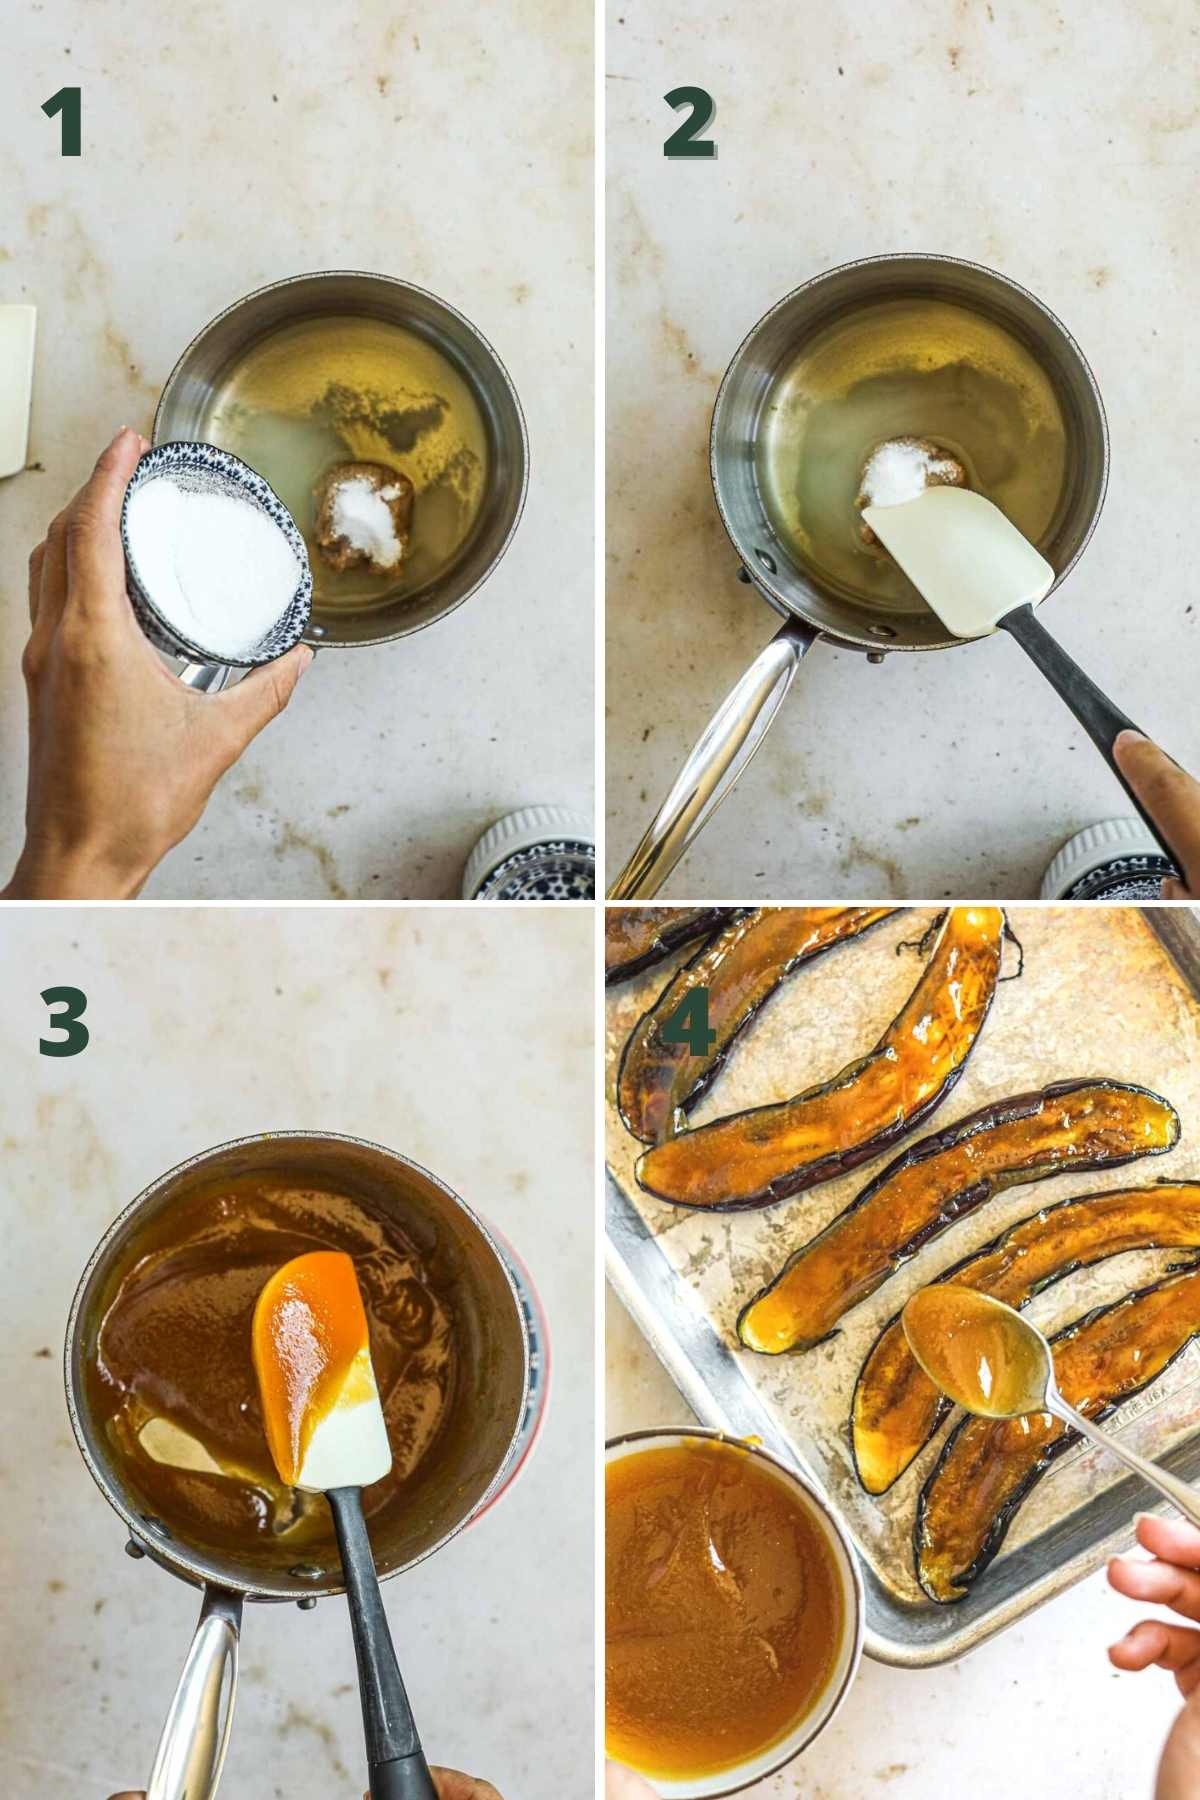 Step to make miso glaze (marinade and glaze), including cooking the ingredients in a saucepan until creamy.